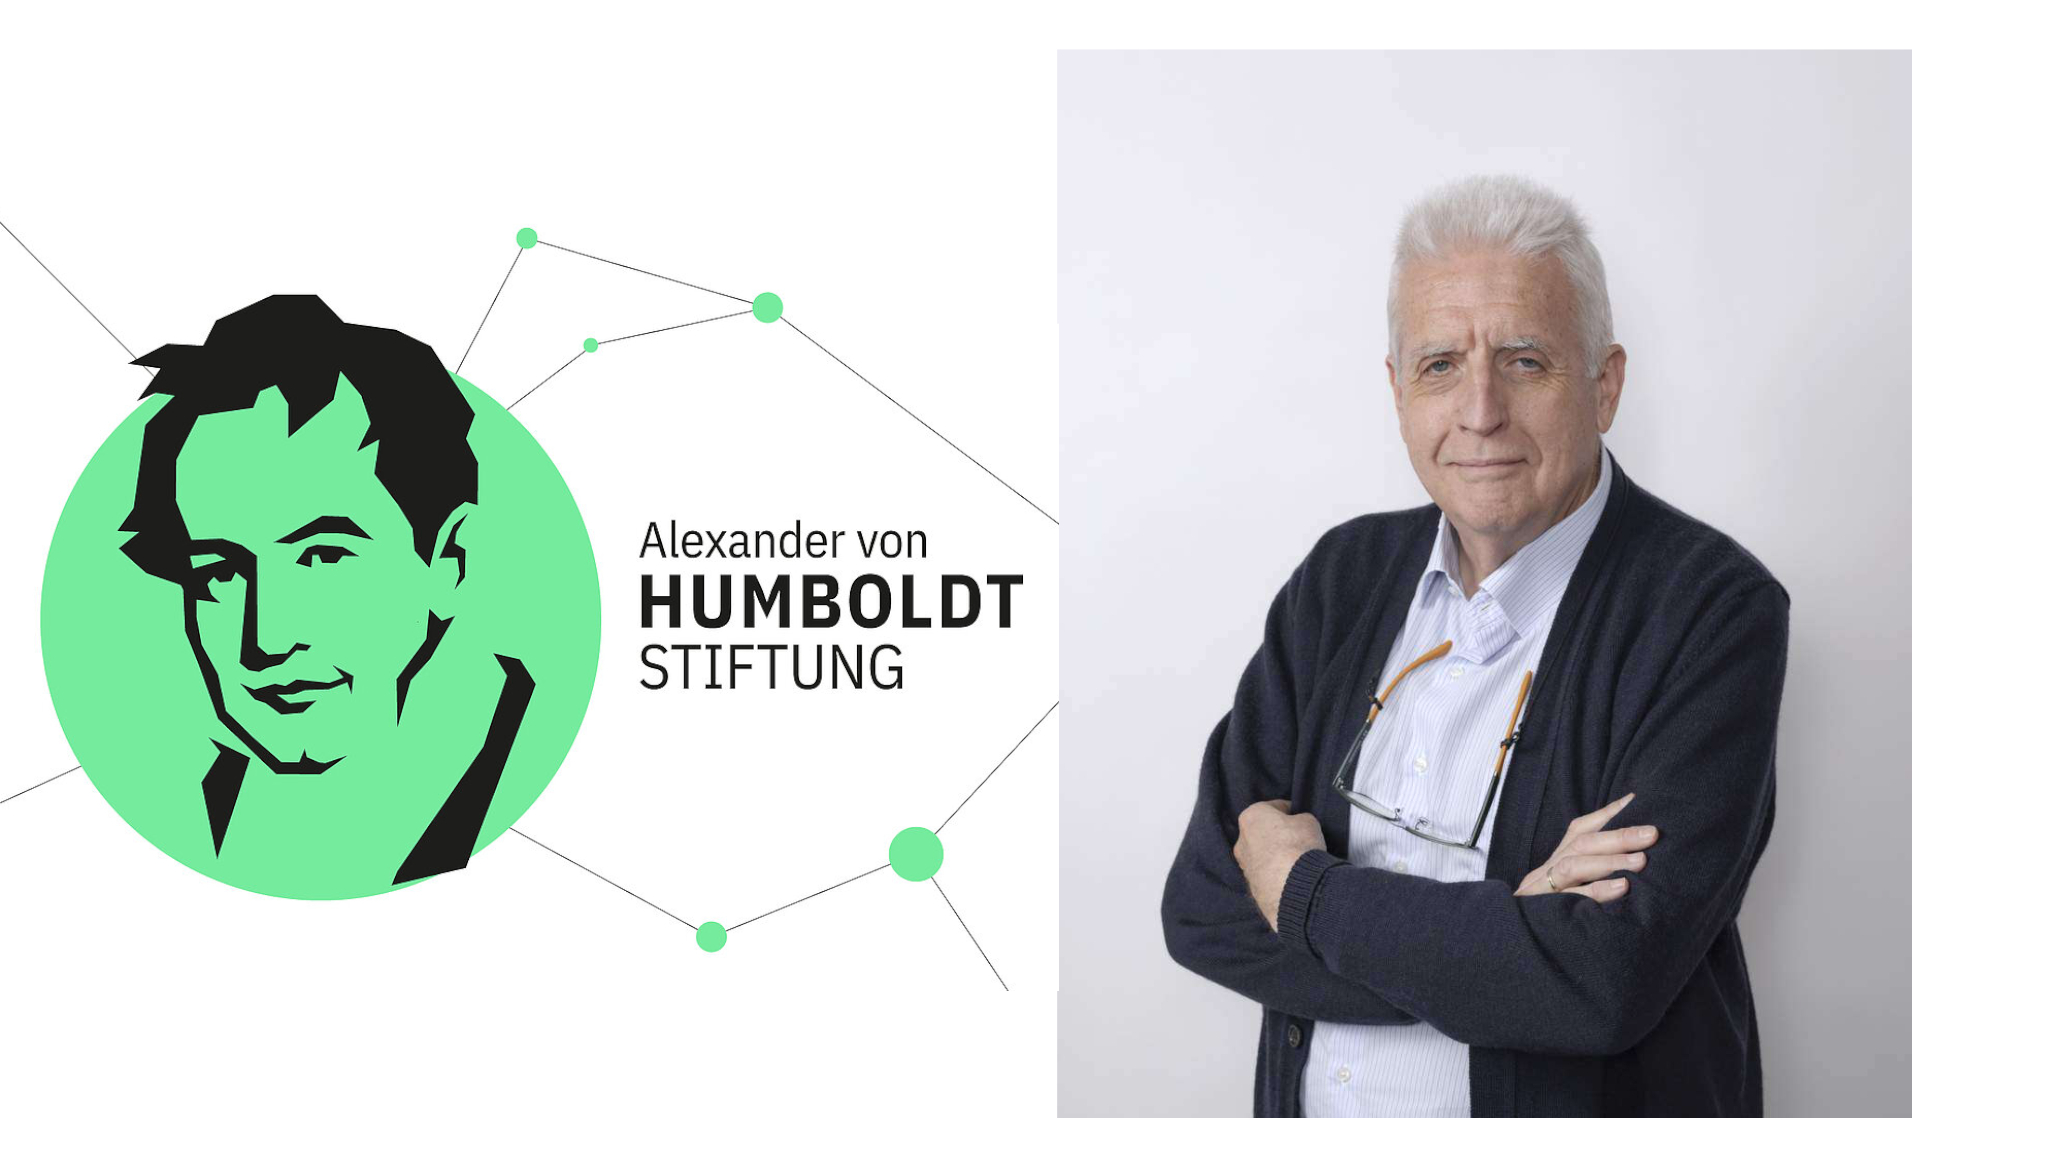 Félix M. Goñi Urcelay at Humboldt Research Award Ceremony